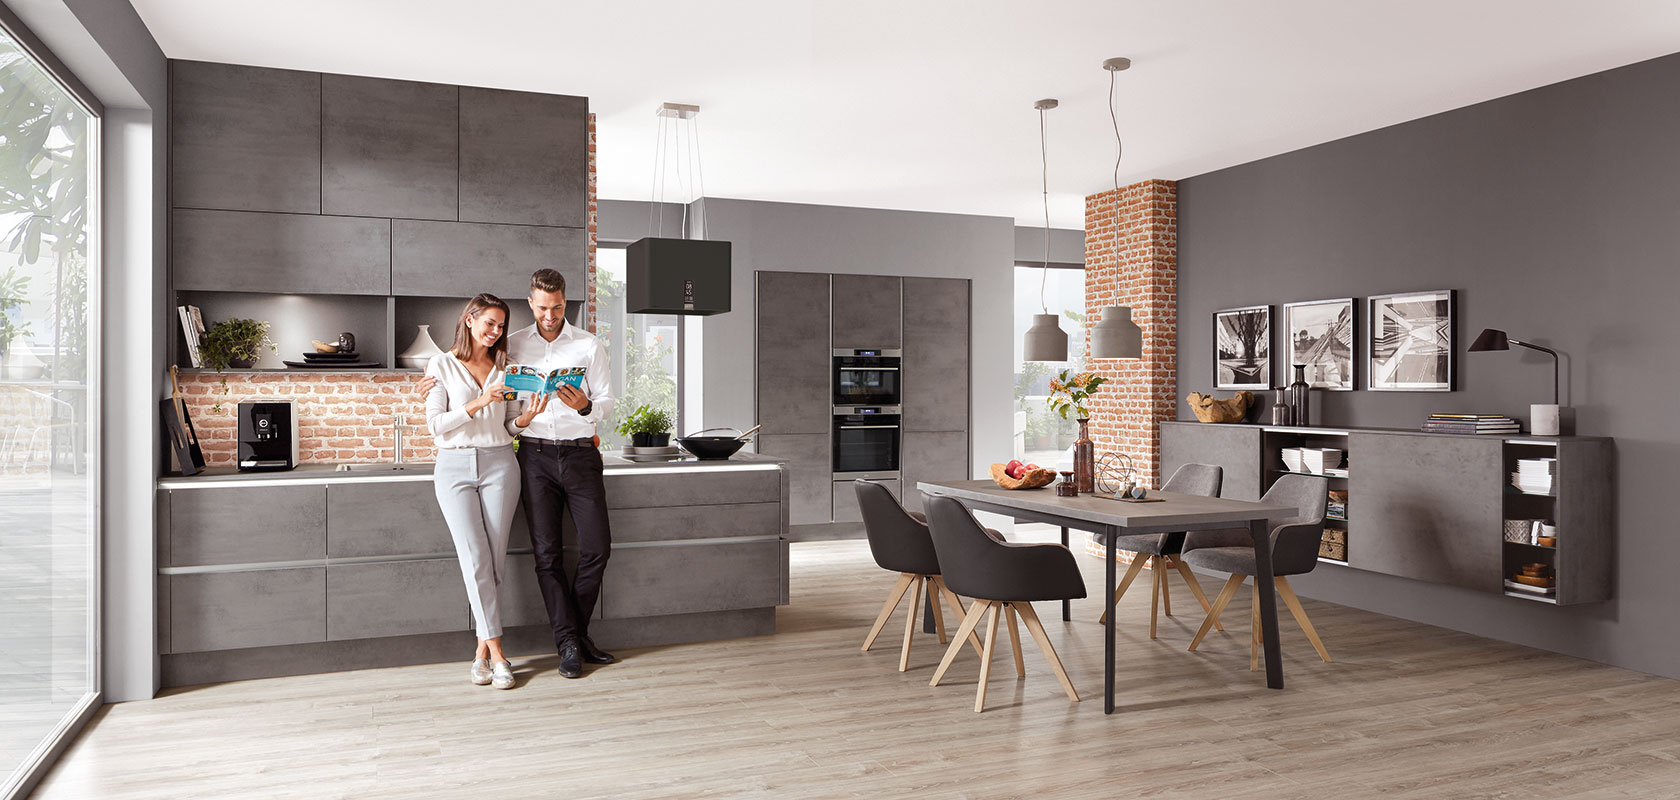 A stylish, modern kitchen with a couple enjoying coffee, featuring sleek gray cabinetry, exposed brick, and a spacious dining area with contemporary decor.